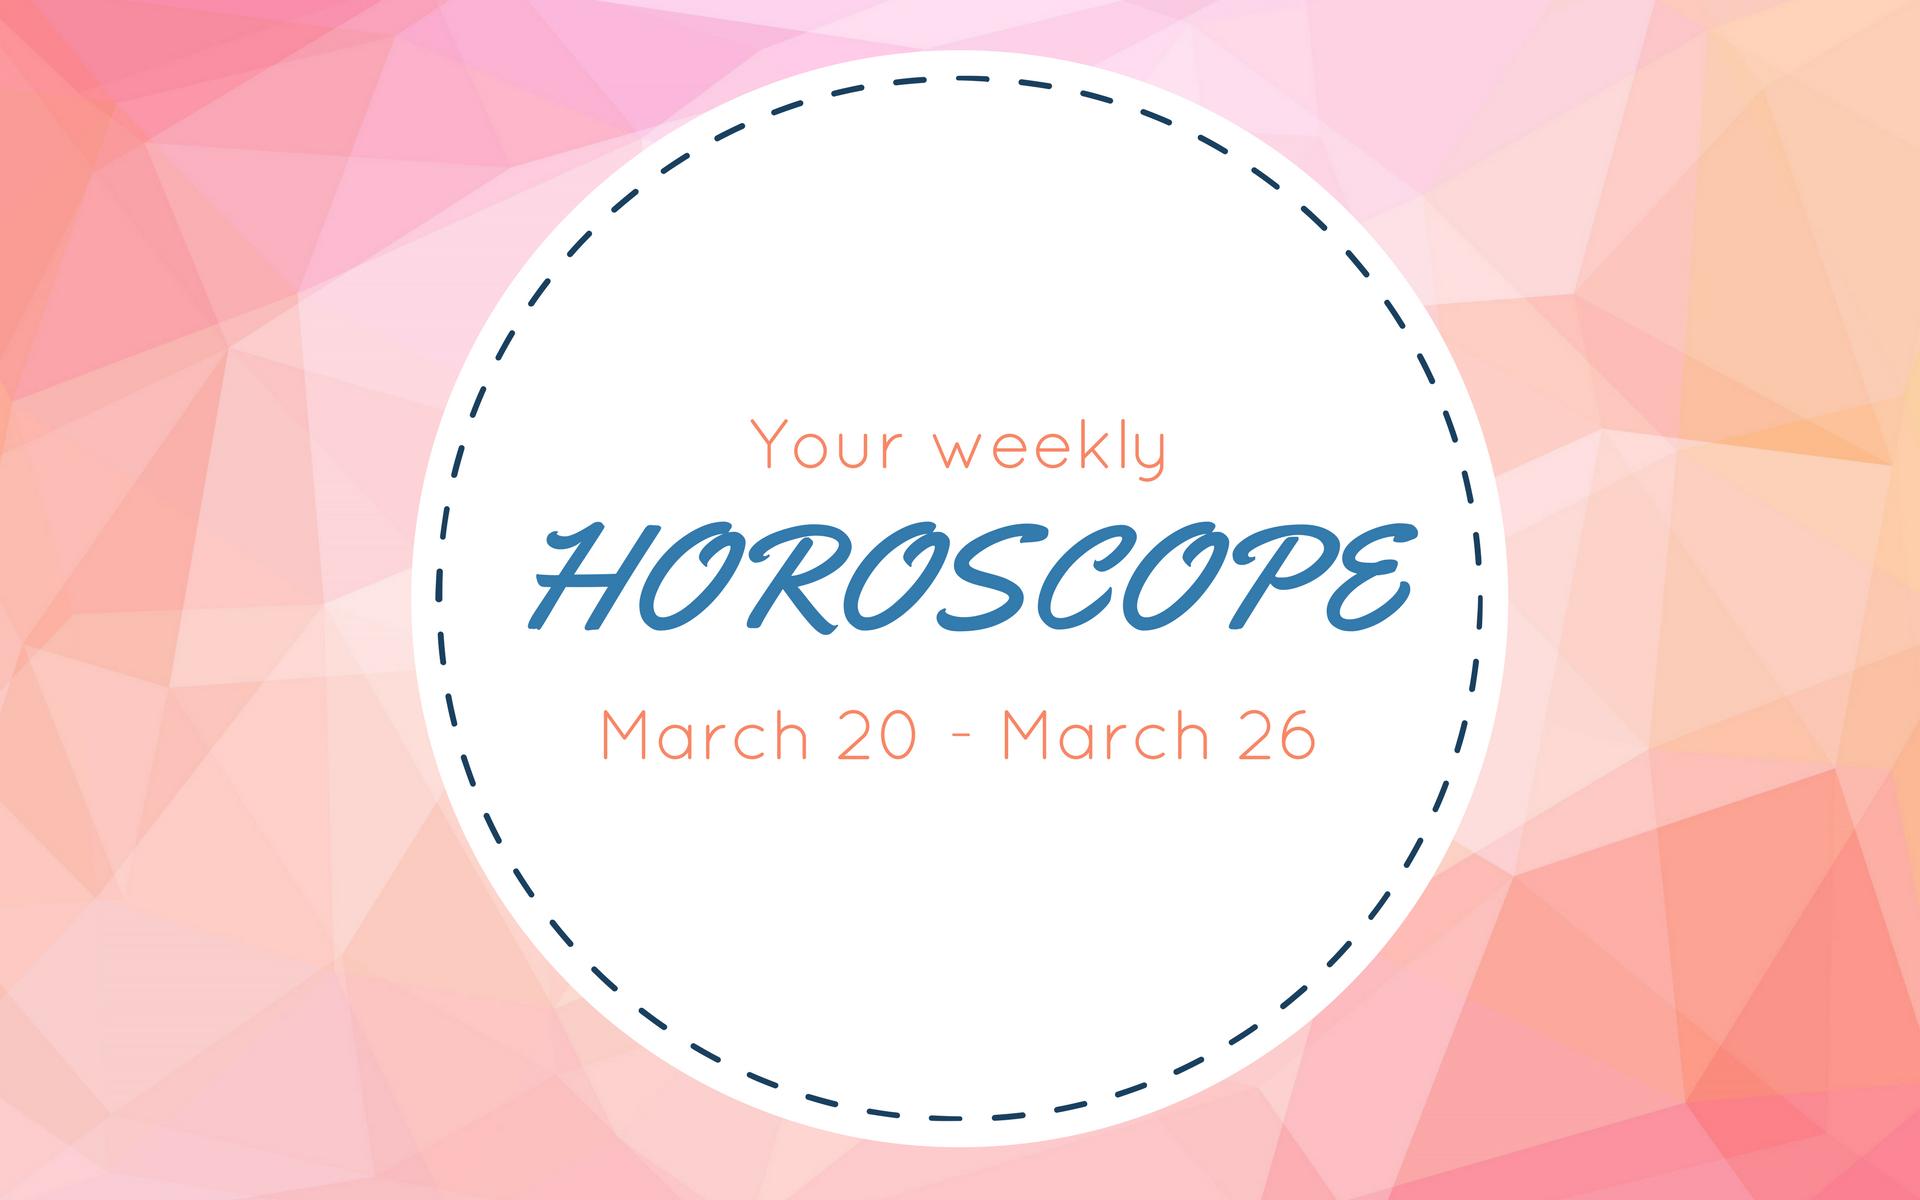 Your Weekly Horoscope: March 20 - March 26